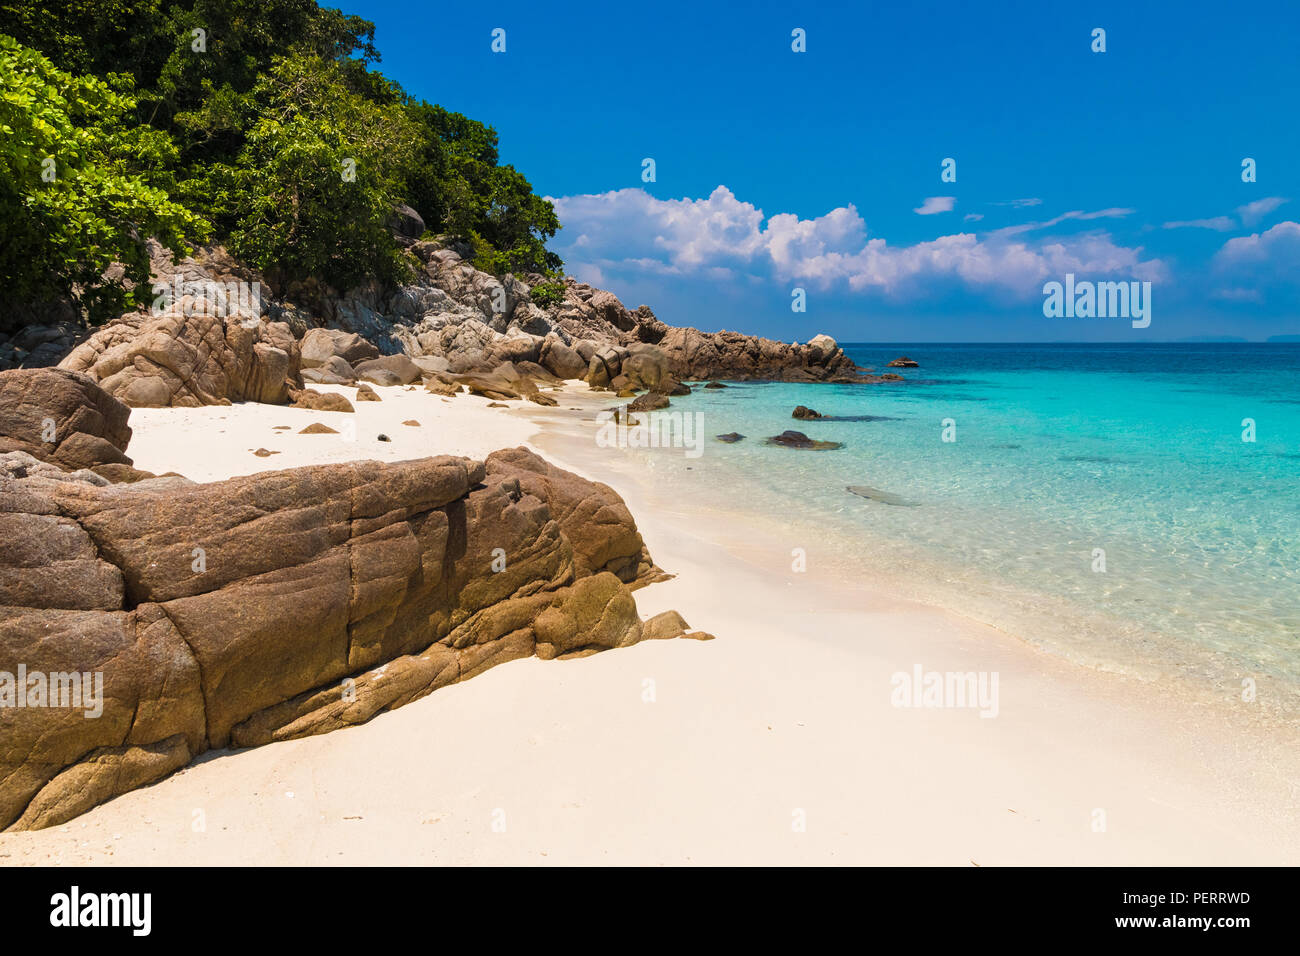 Beautiful stretch of a fine soft white sandy beach, turquoise blue shimmering water, big rocks & lush trees which belongs to Rawa Island, a popular... Stock Photo